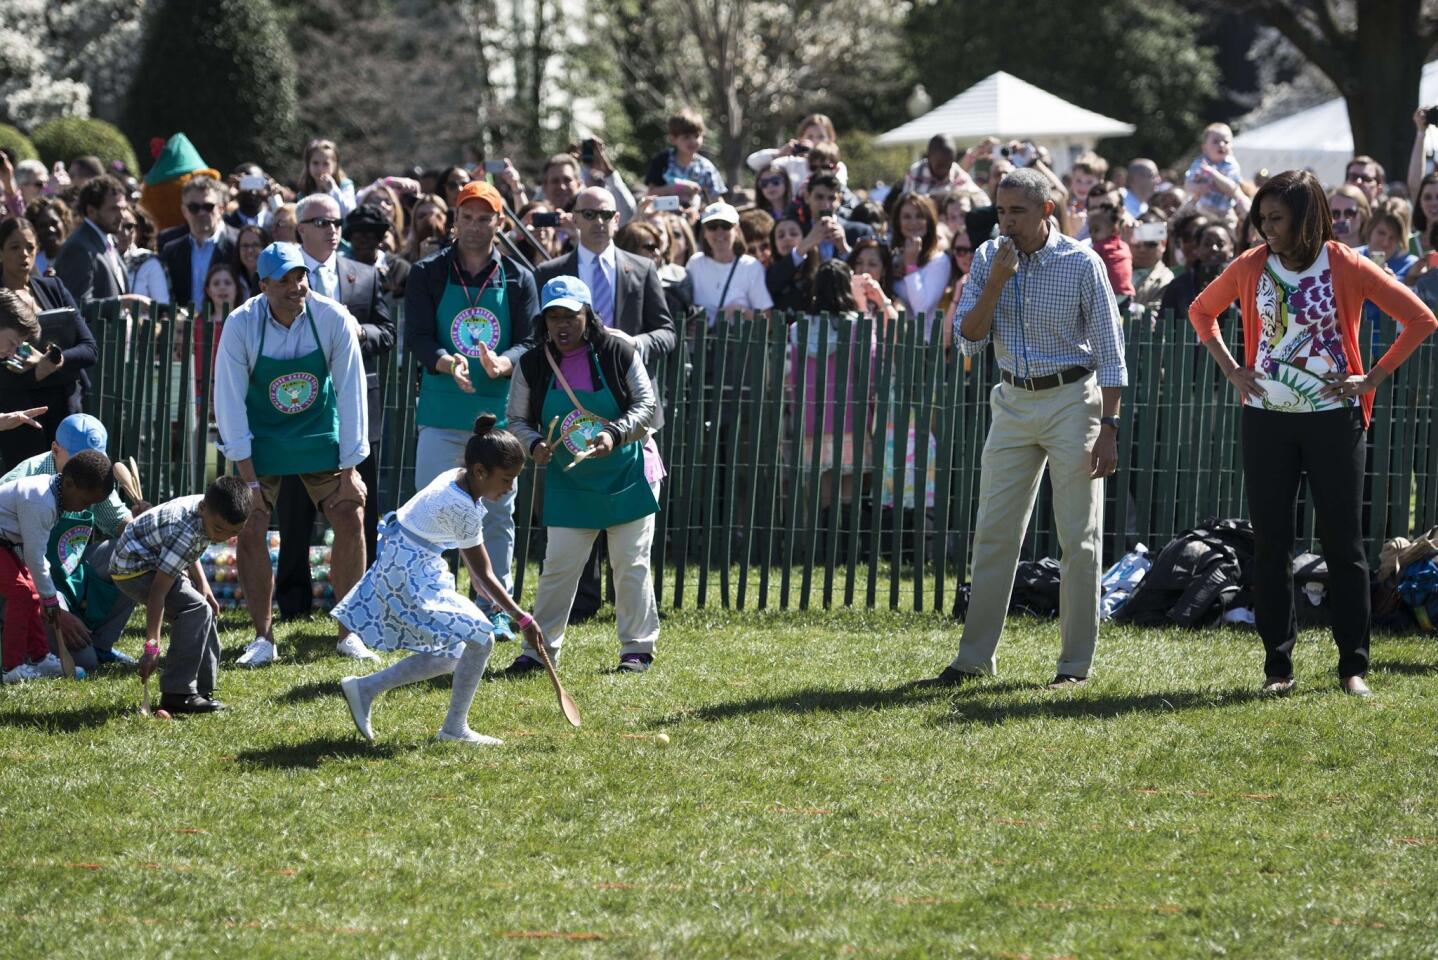 President Barack Obama and first lady Michelle Obama watch children during the annual Easter Egg Roll at the White House on April 6, 2015.